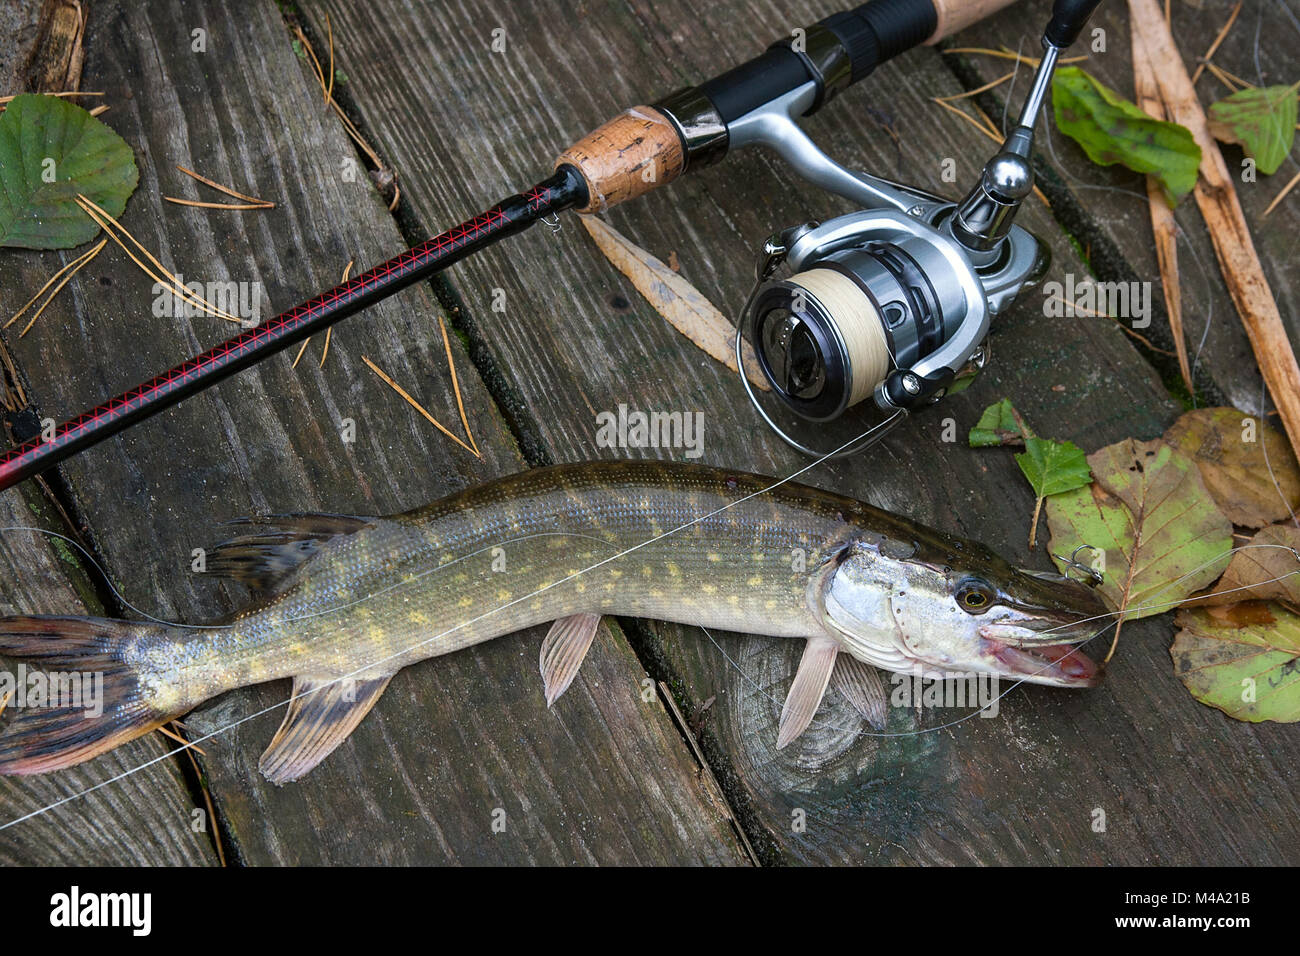 https://c8.alamy.com/comp/M4A21B/freshwater-northern-pike-fish-know-as-esox-lucius-and-fishing-rod-M4A21B.jpg